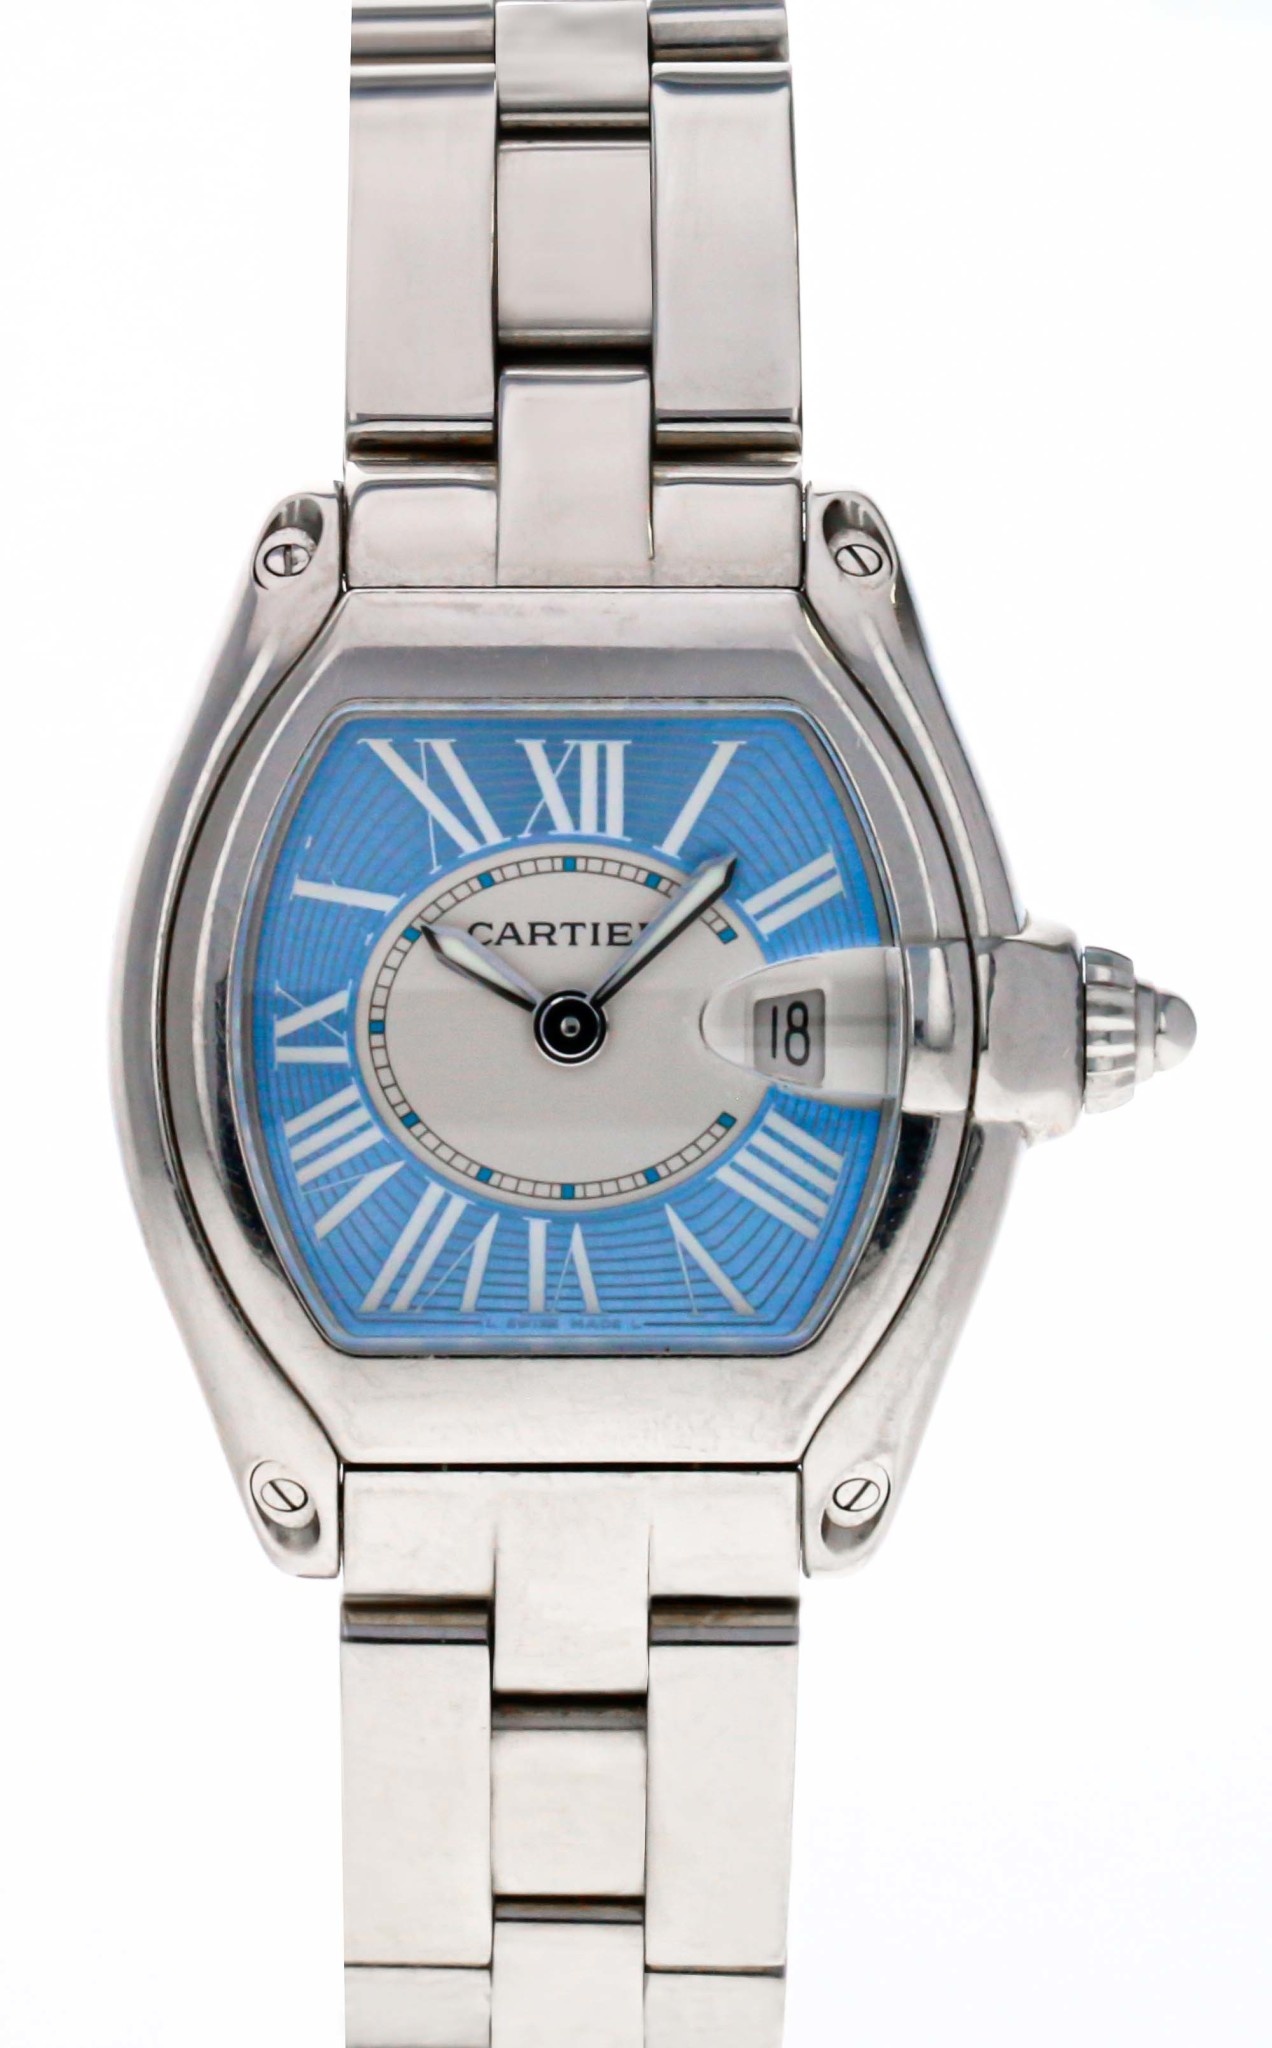 CARTIER ROADSTER SMALL SIZE #2675 